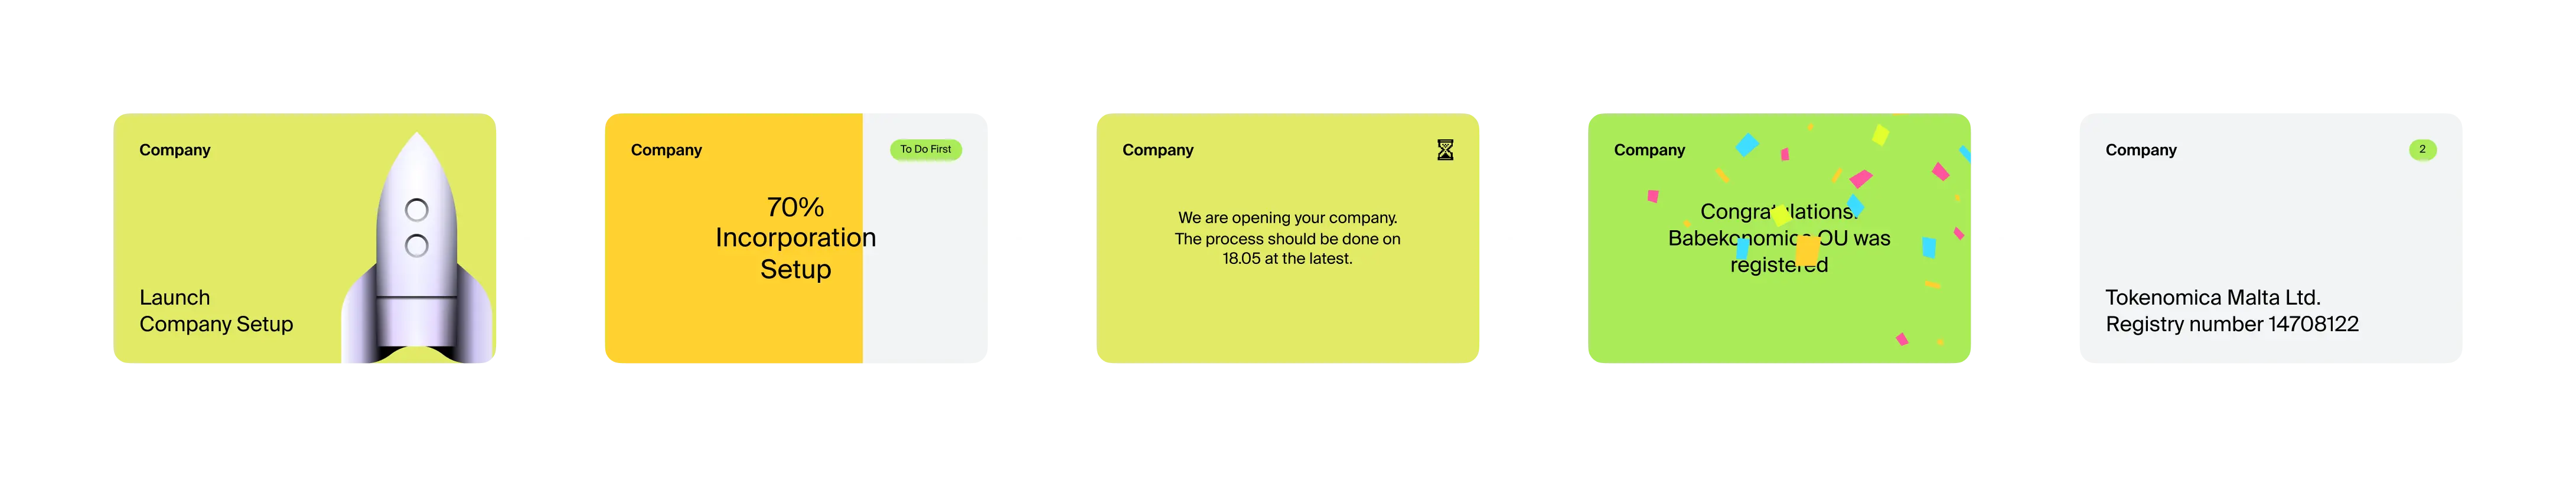 Company card stages